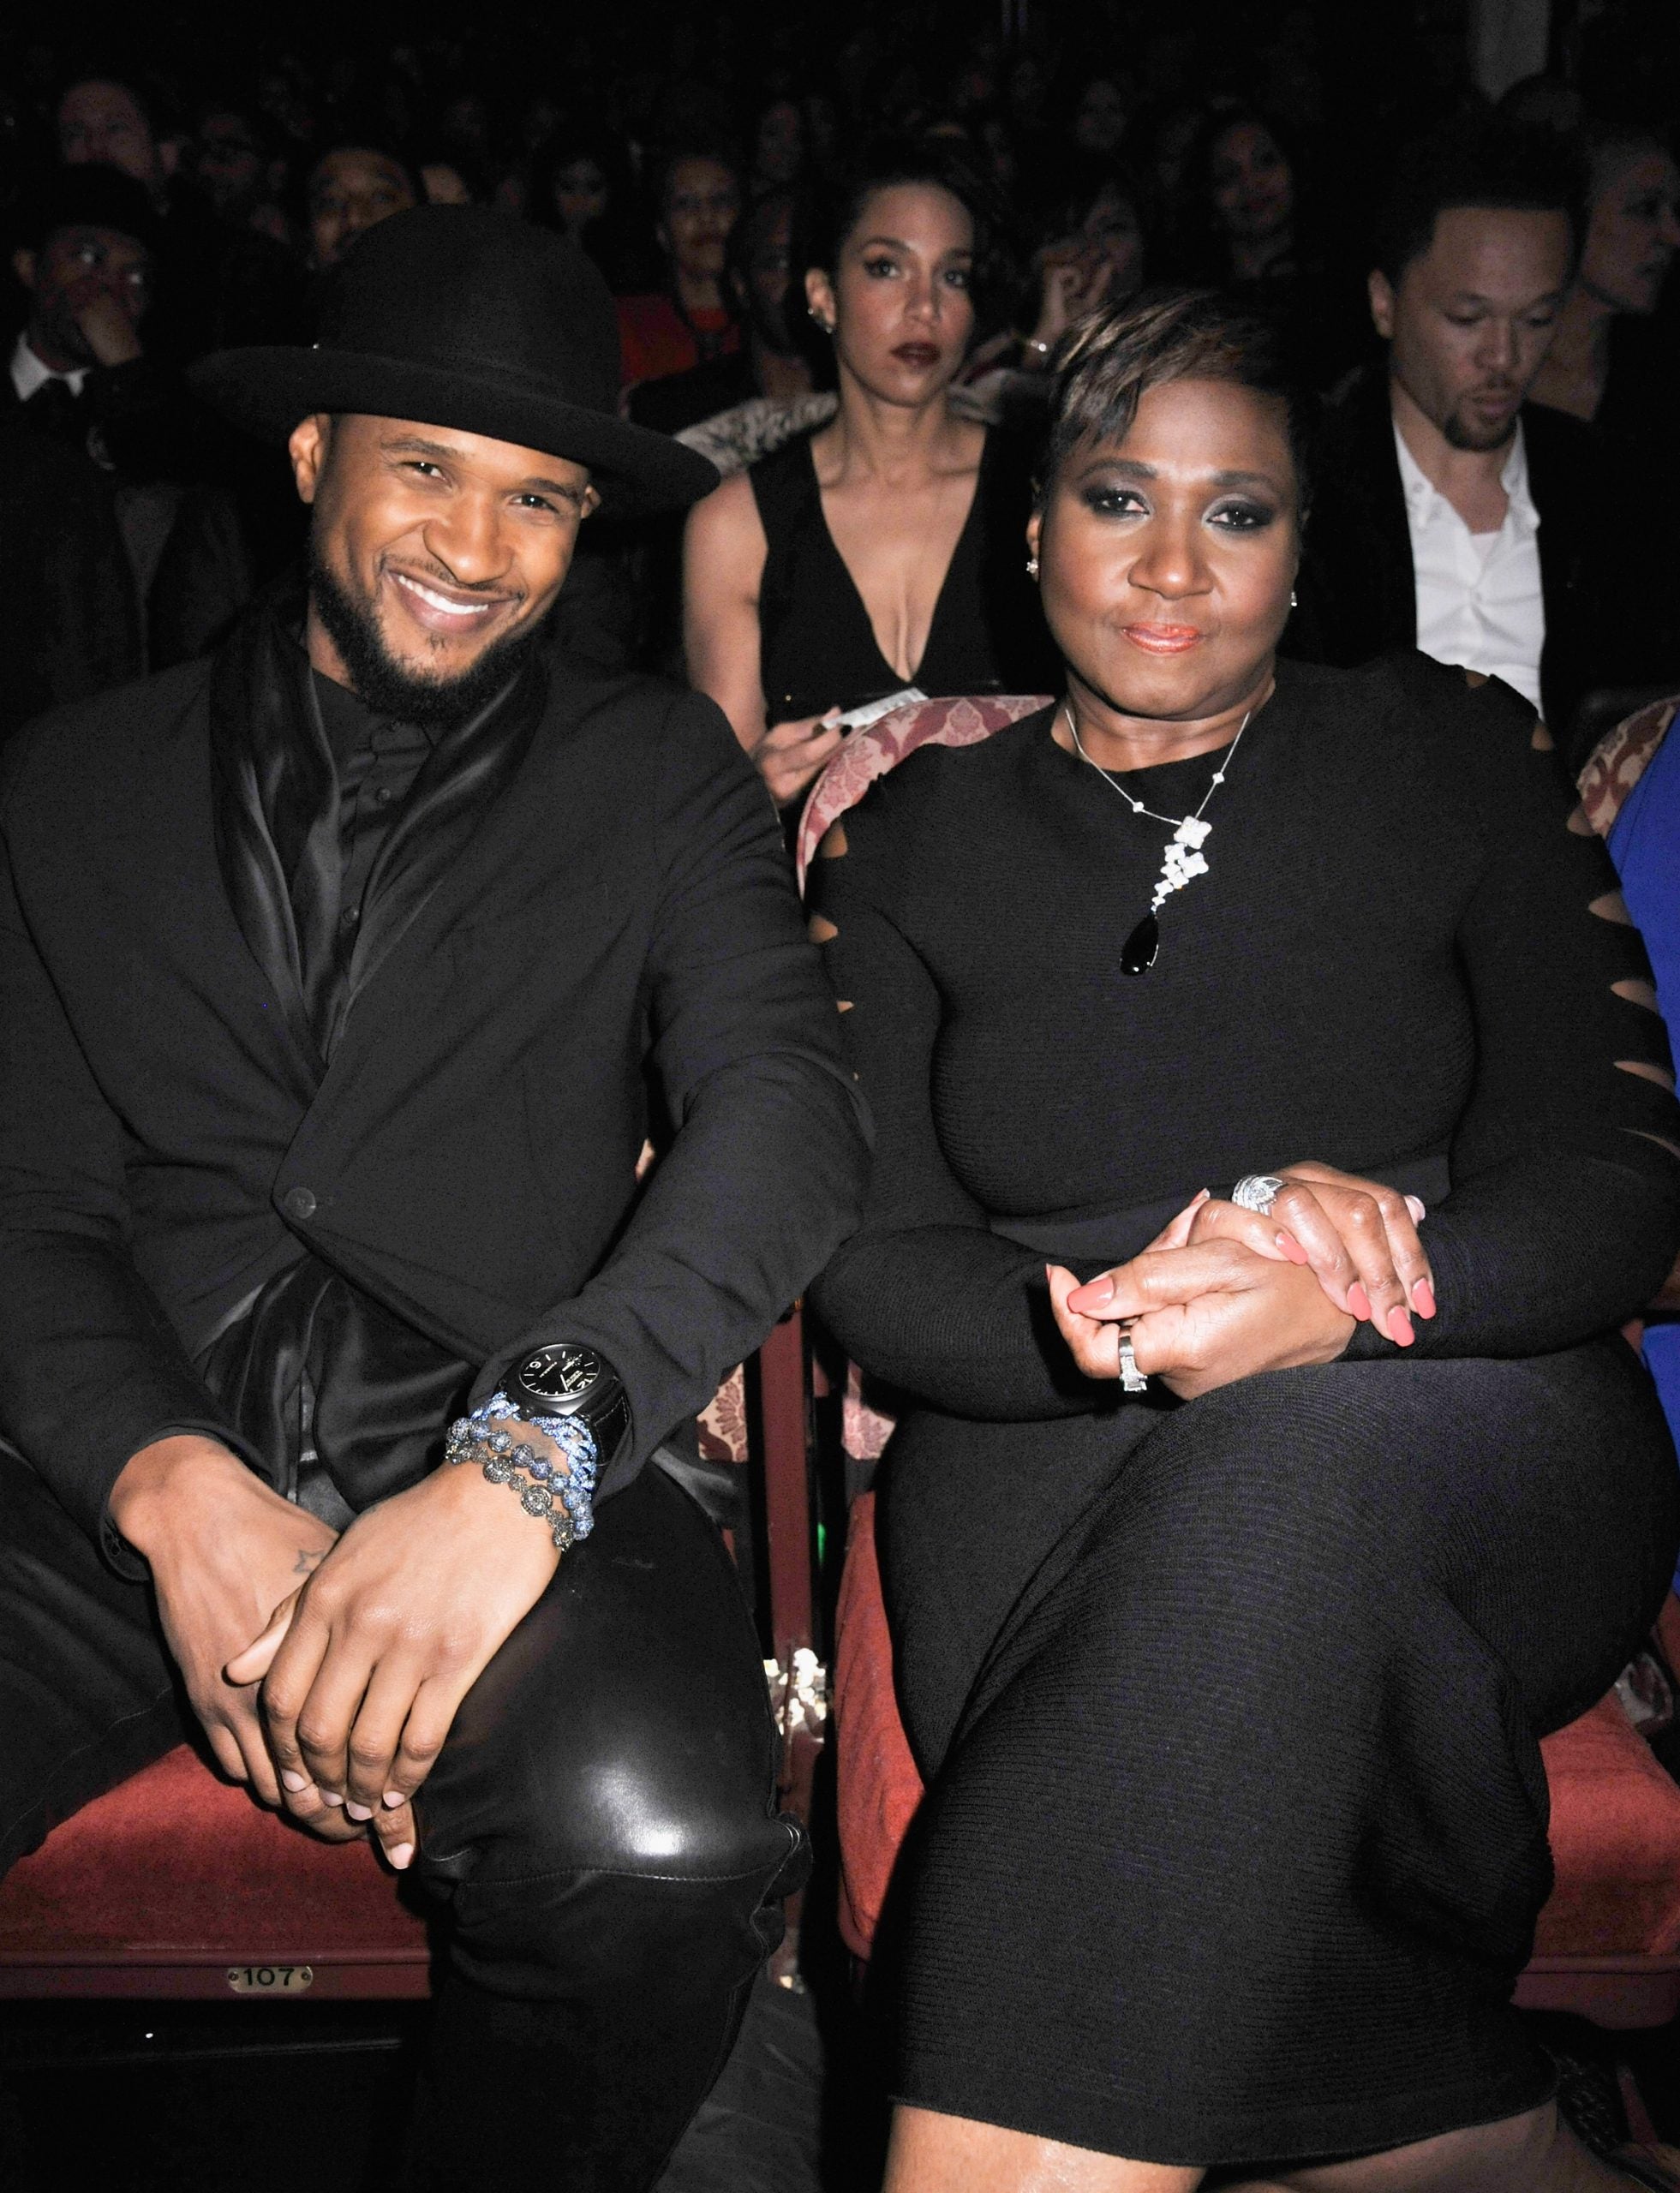 Usher’s Mom Jonnetta Patton Built Her Own Empire After She Saw ‘Deception’ All Around Her